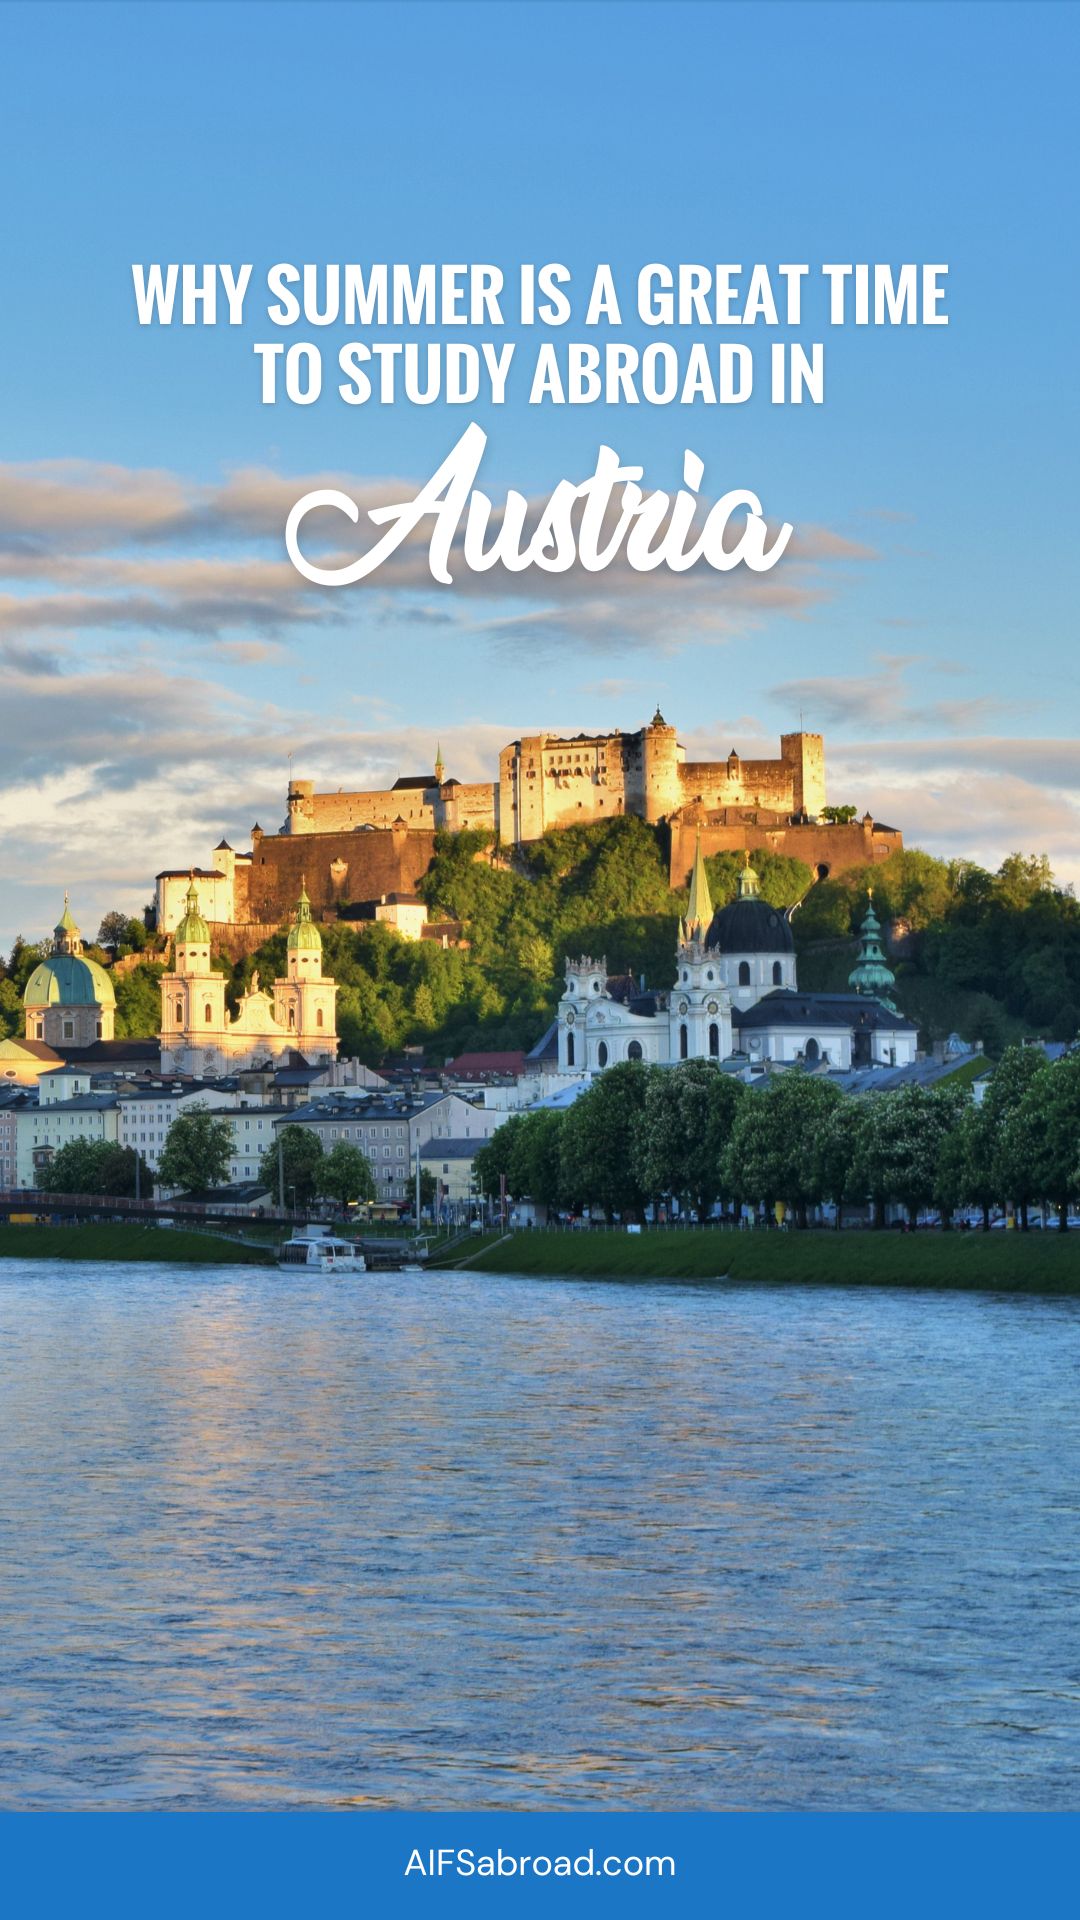 Pin image: View of Fortress Hohensalzburg in Salzburg, Austria during summer months with text overlay saying "why summer is a great time to study abroad in austria"